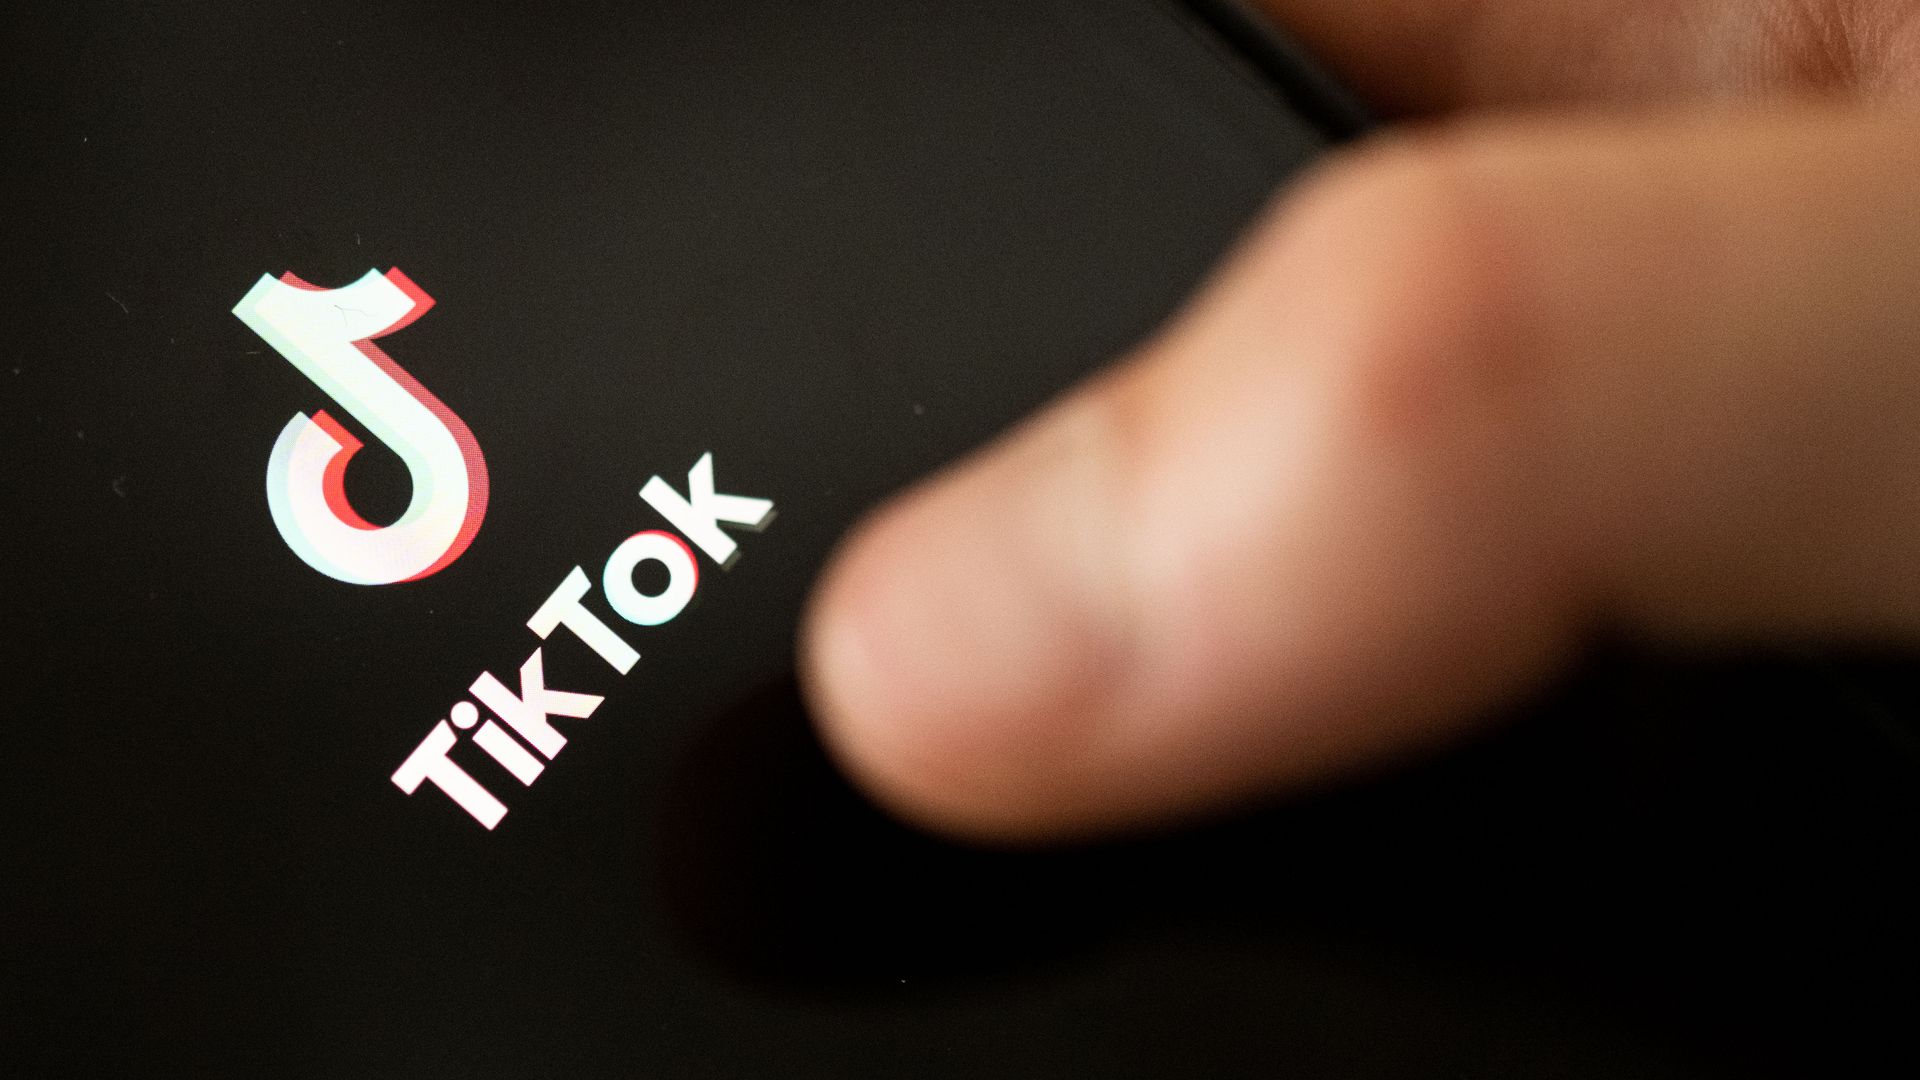 Photo of a thumb clicking on the TikTok app logo as shown on a phone screen